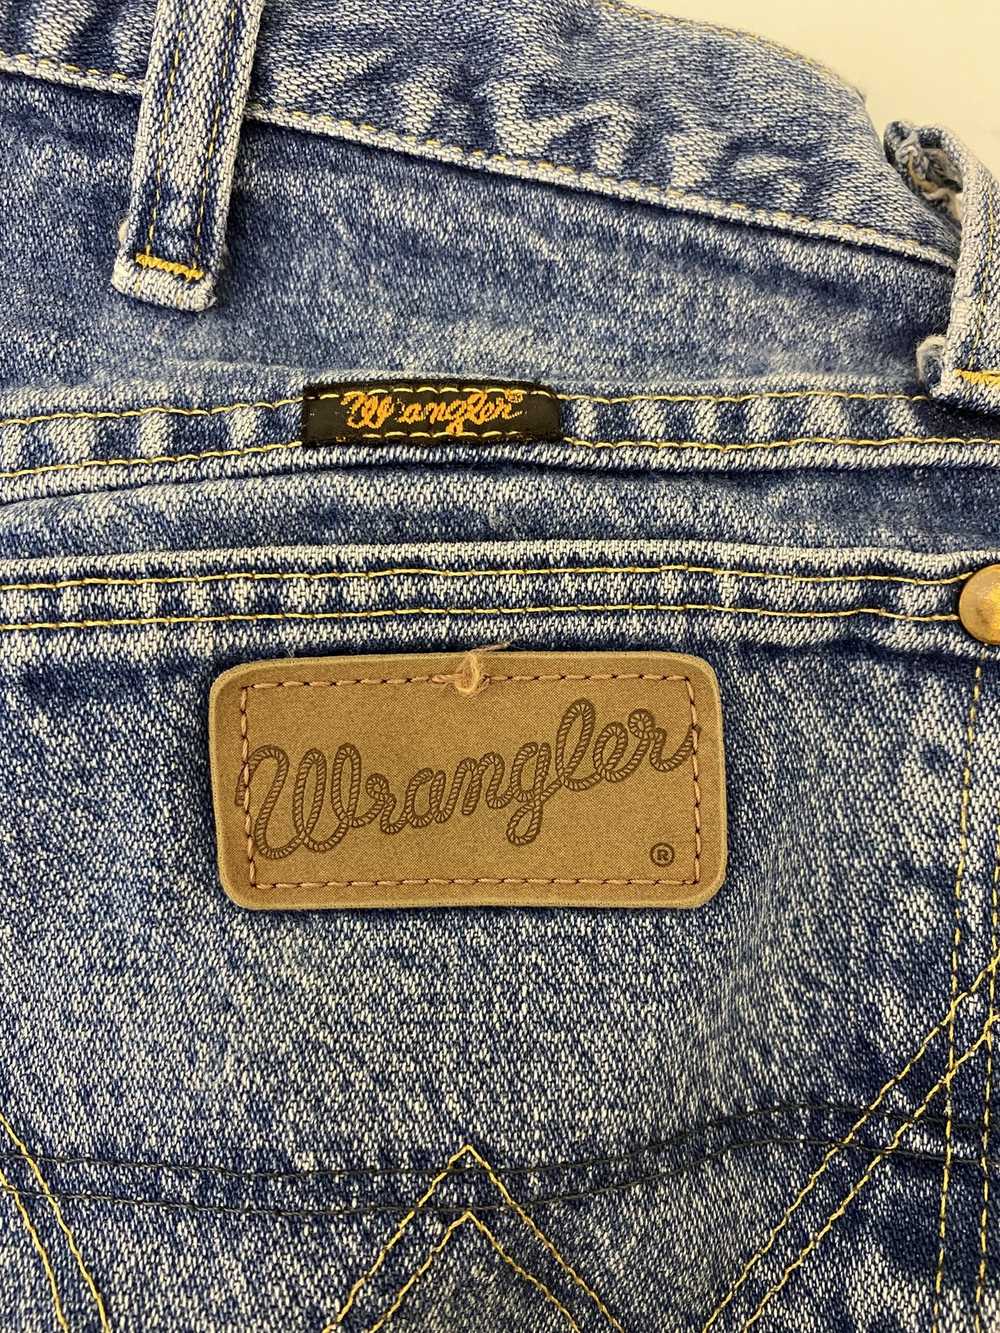 Wrangler OLD 36 x 36 Wrangler jeans leather patch - image 4